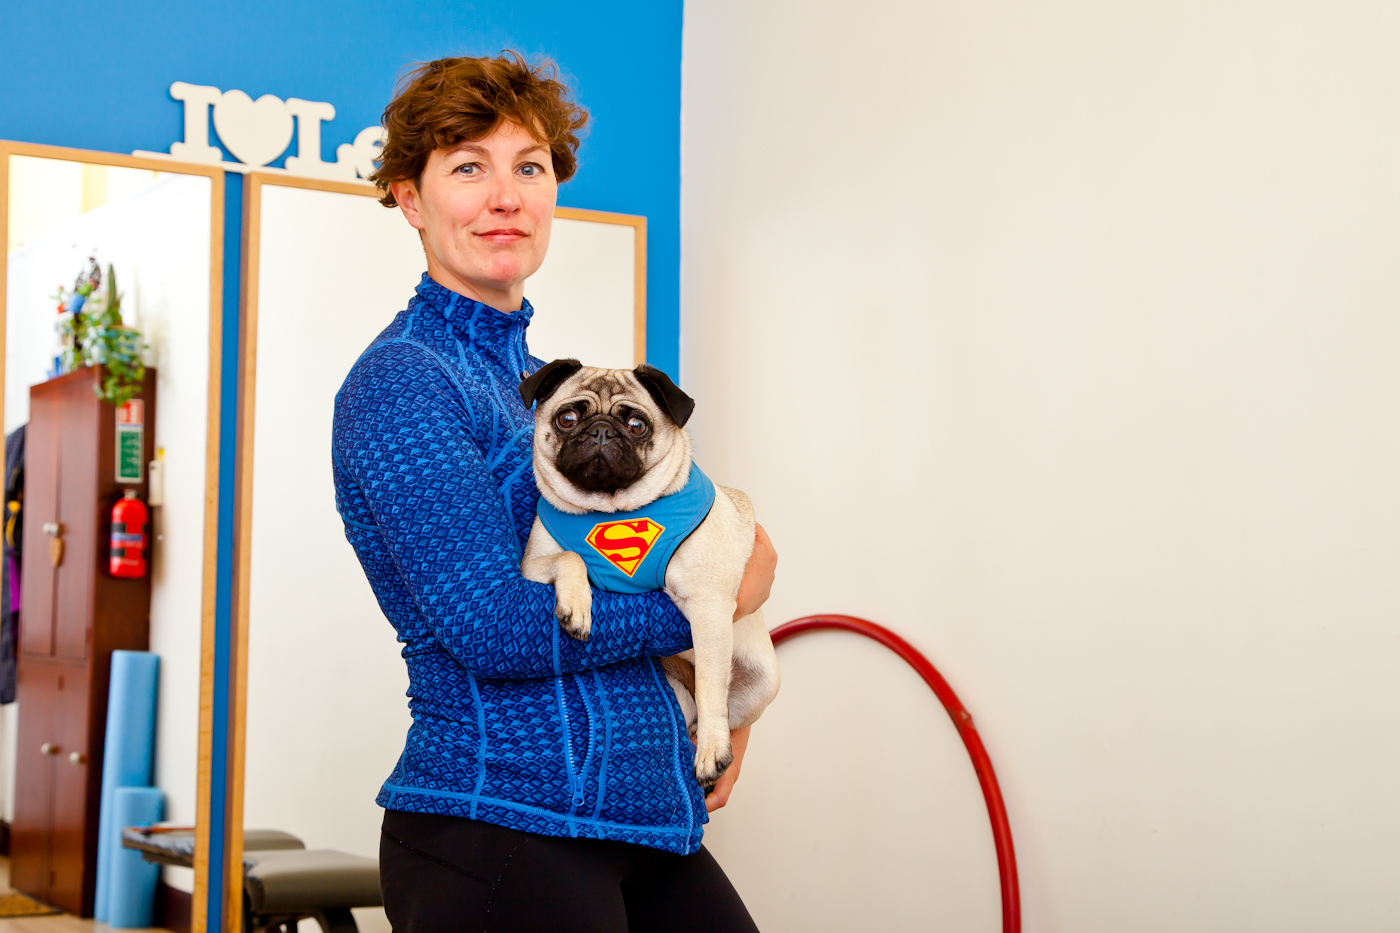 Business owner Tracey Griffen holding pet pug in her fi8tness studio.